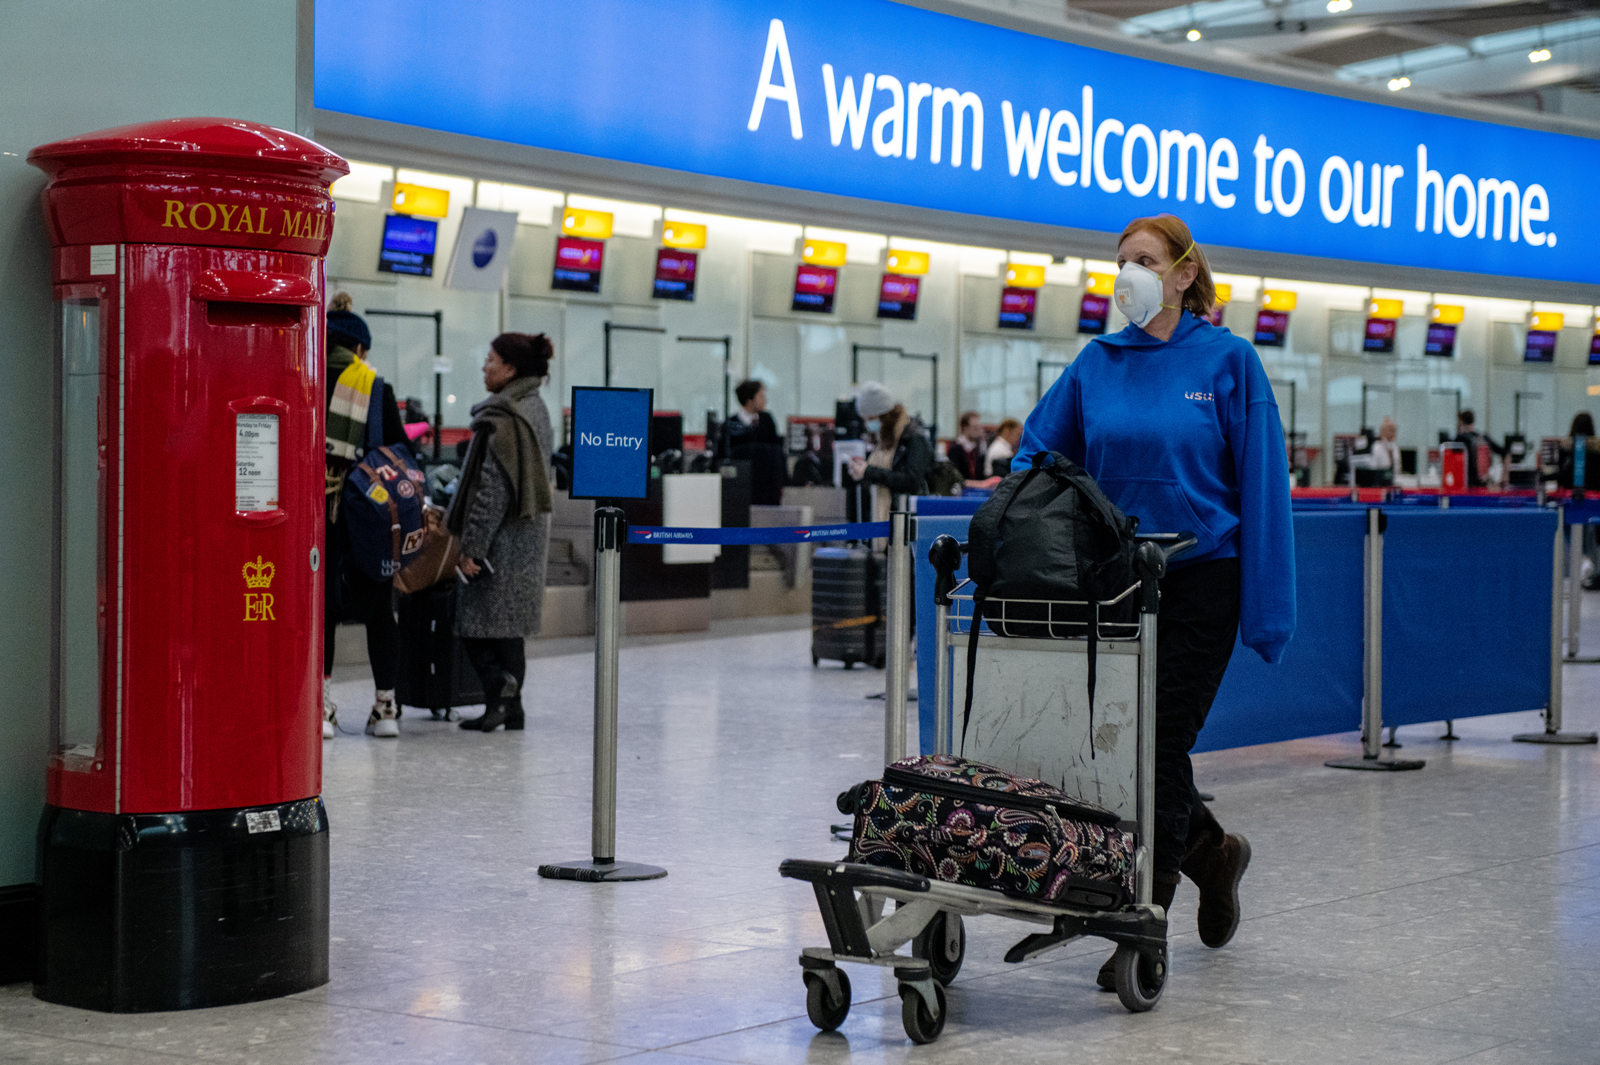 An airline passenger wearing a face mask pushes her bags past a post box at Heathrow Terminal 5 departures on March 15, in London.